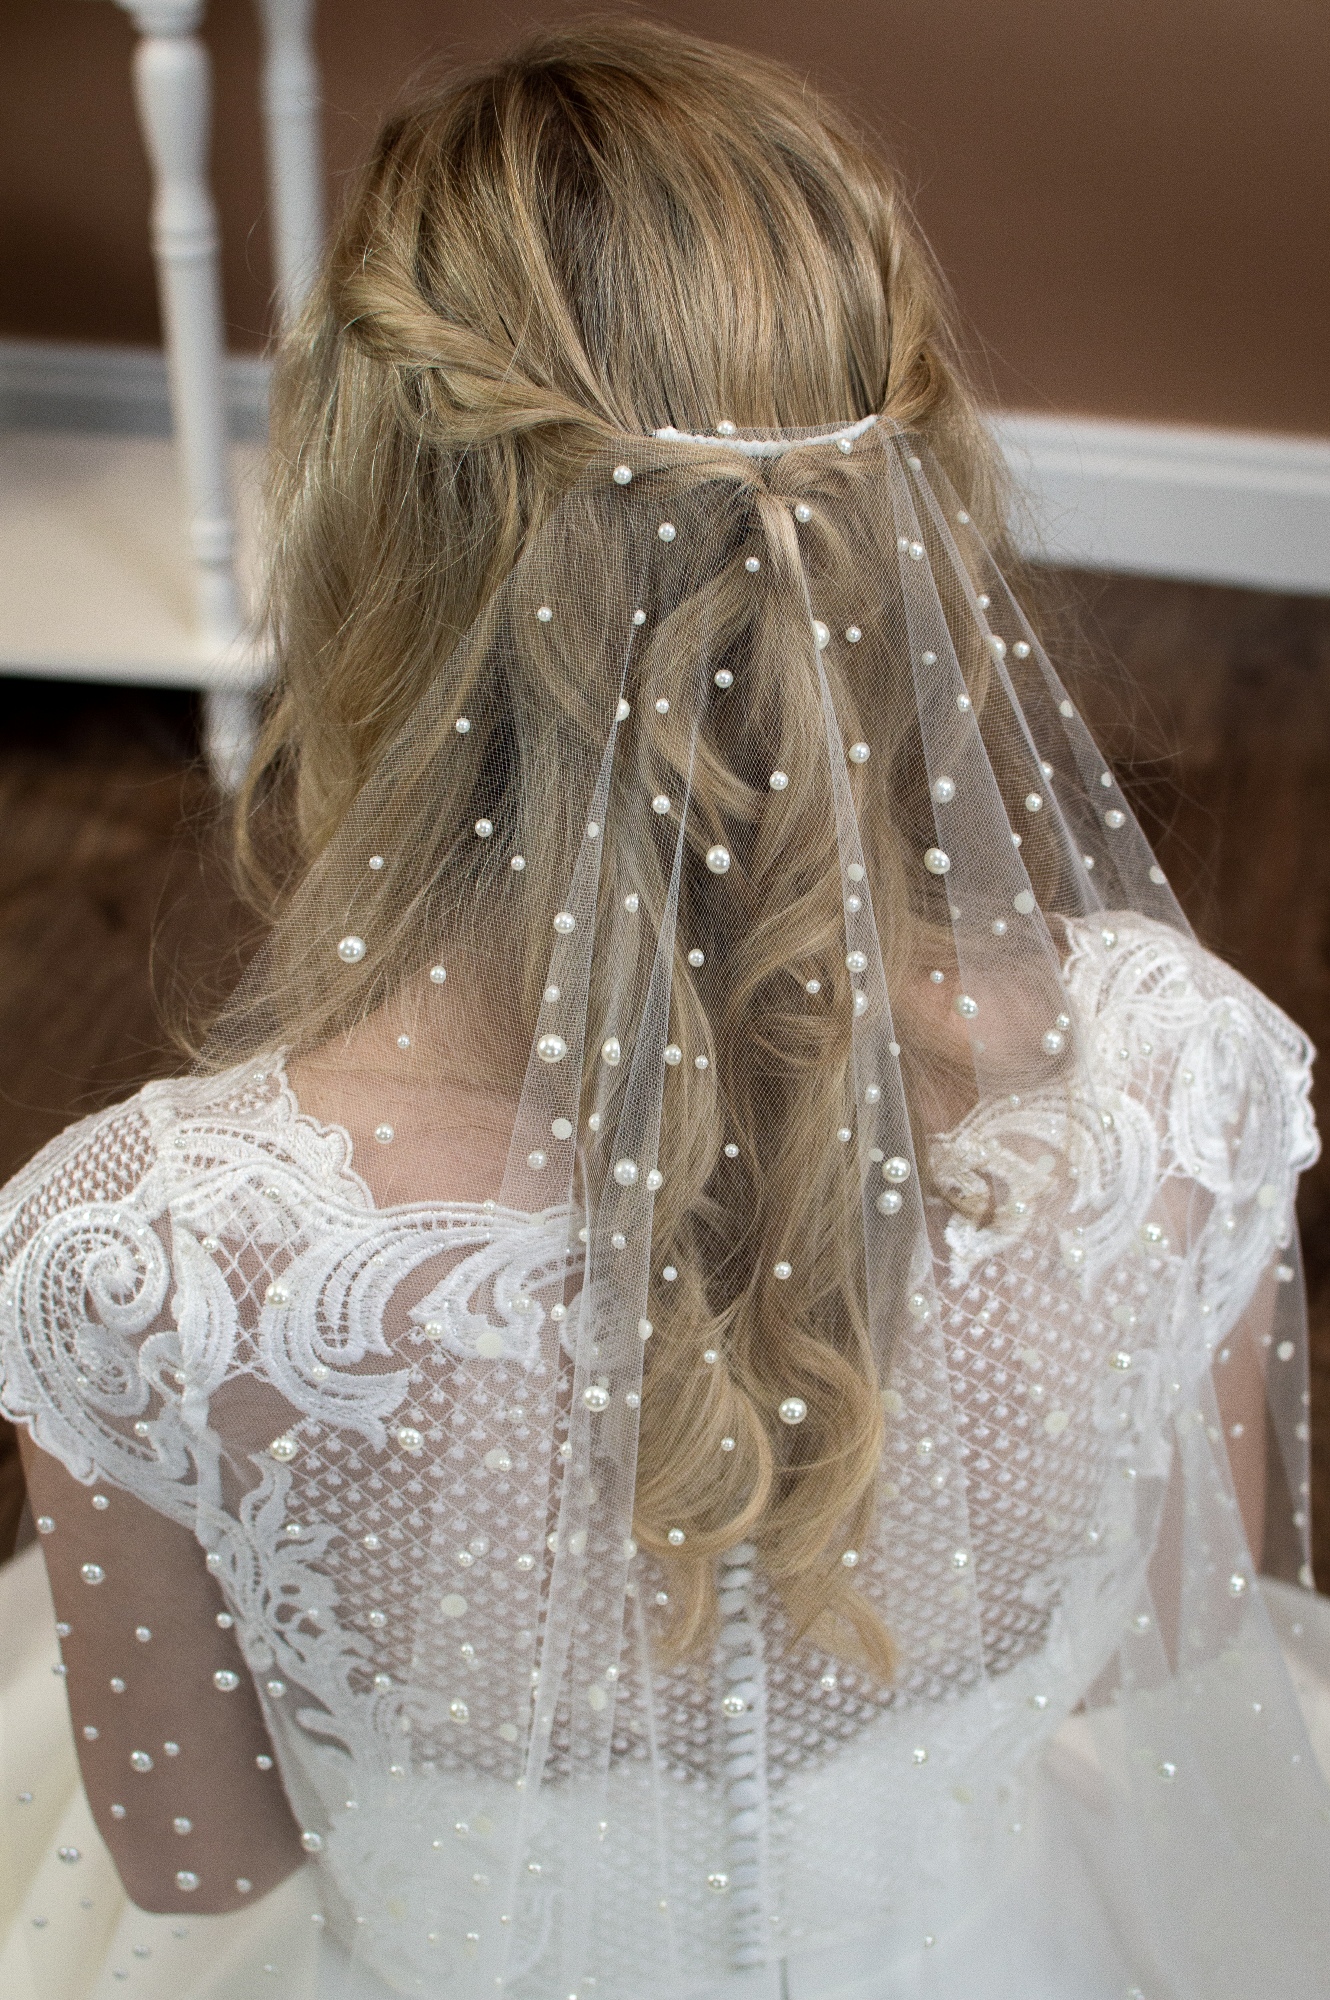 Violet Single layer barely there veil in fingertip length with a cut edge and mixed size pearls closeup  - The Wedding Veil Shop: Wedding Veil Lengths + Styles for Every Bride